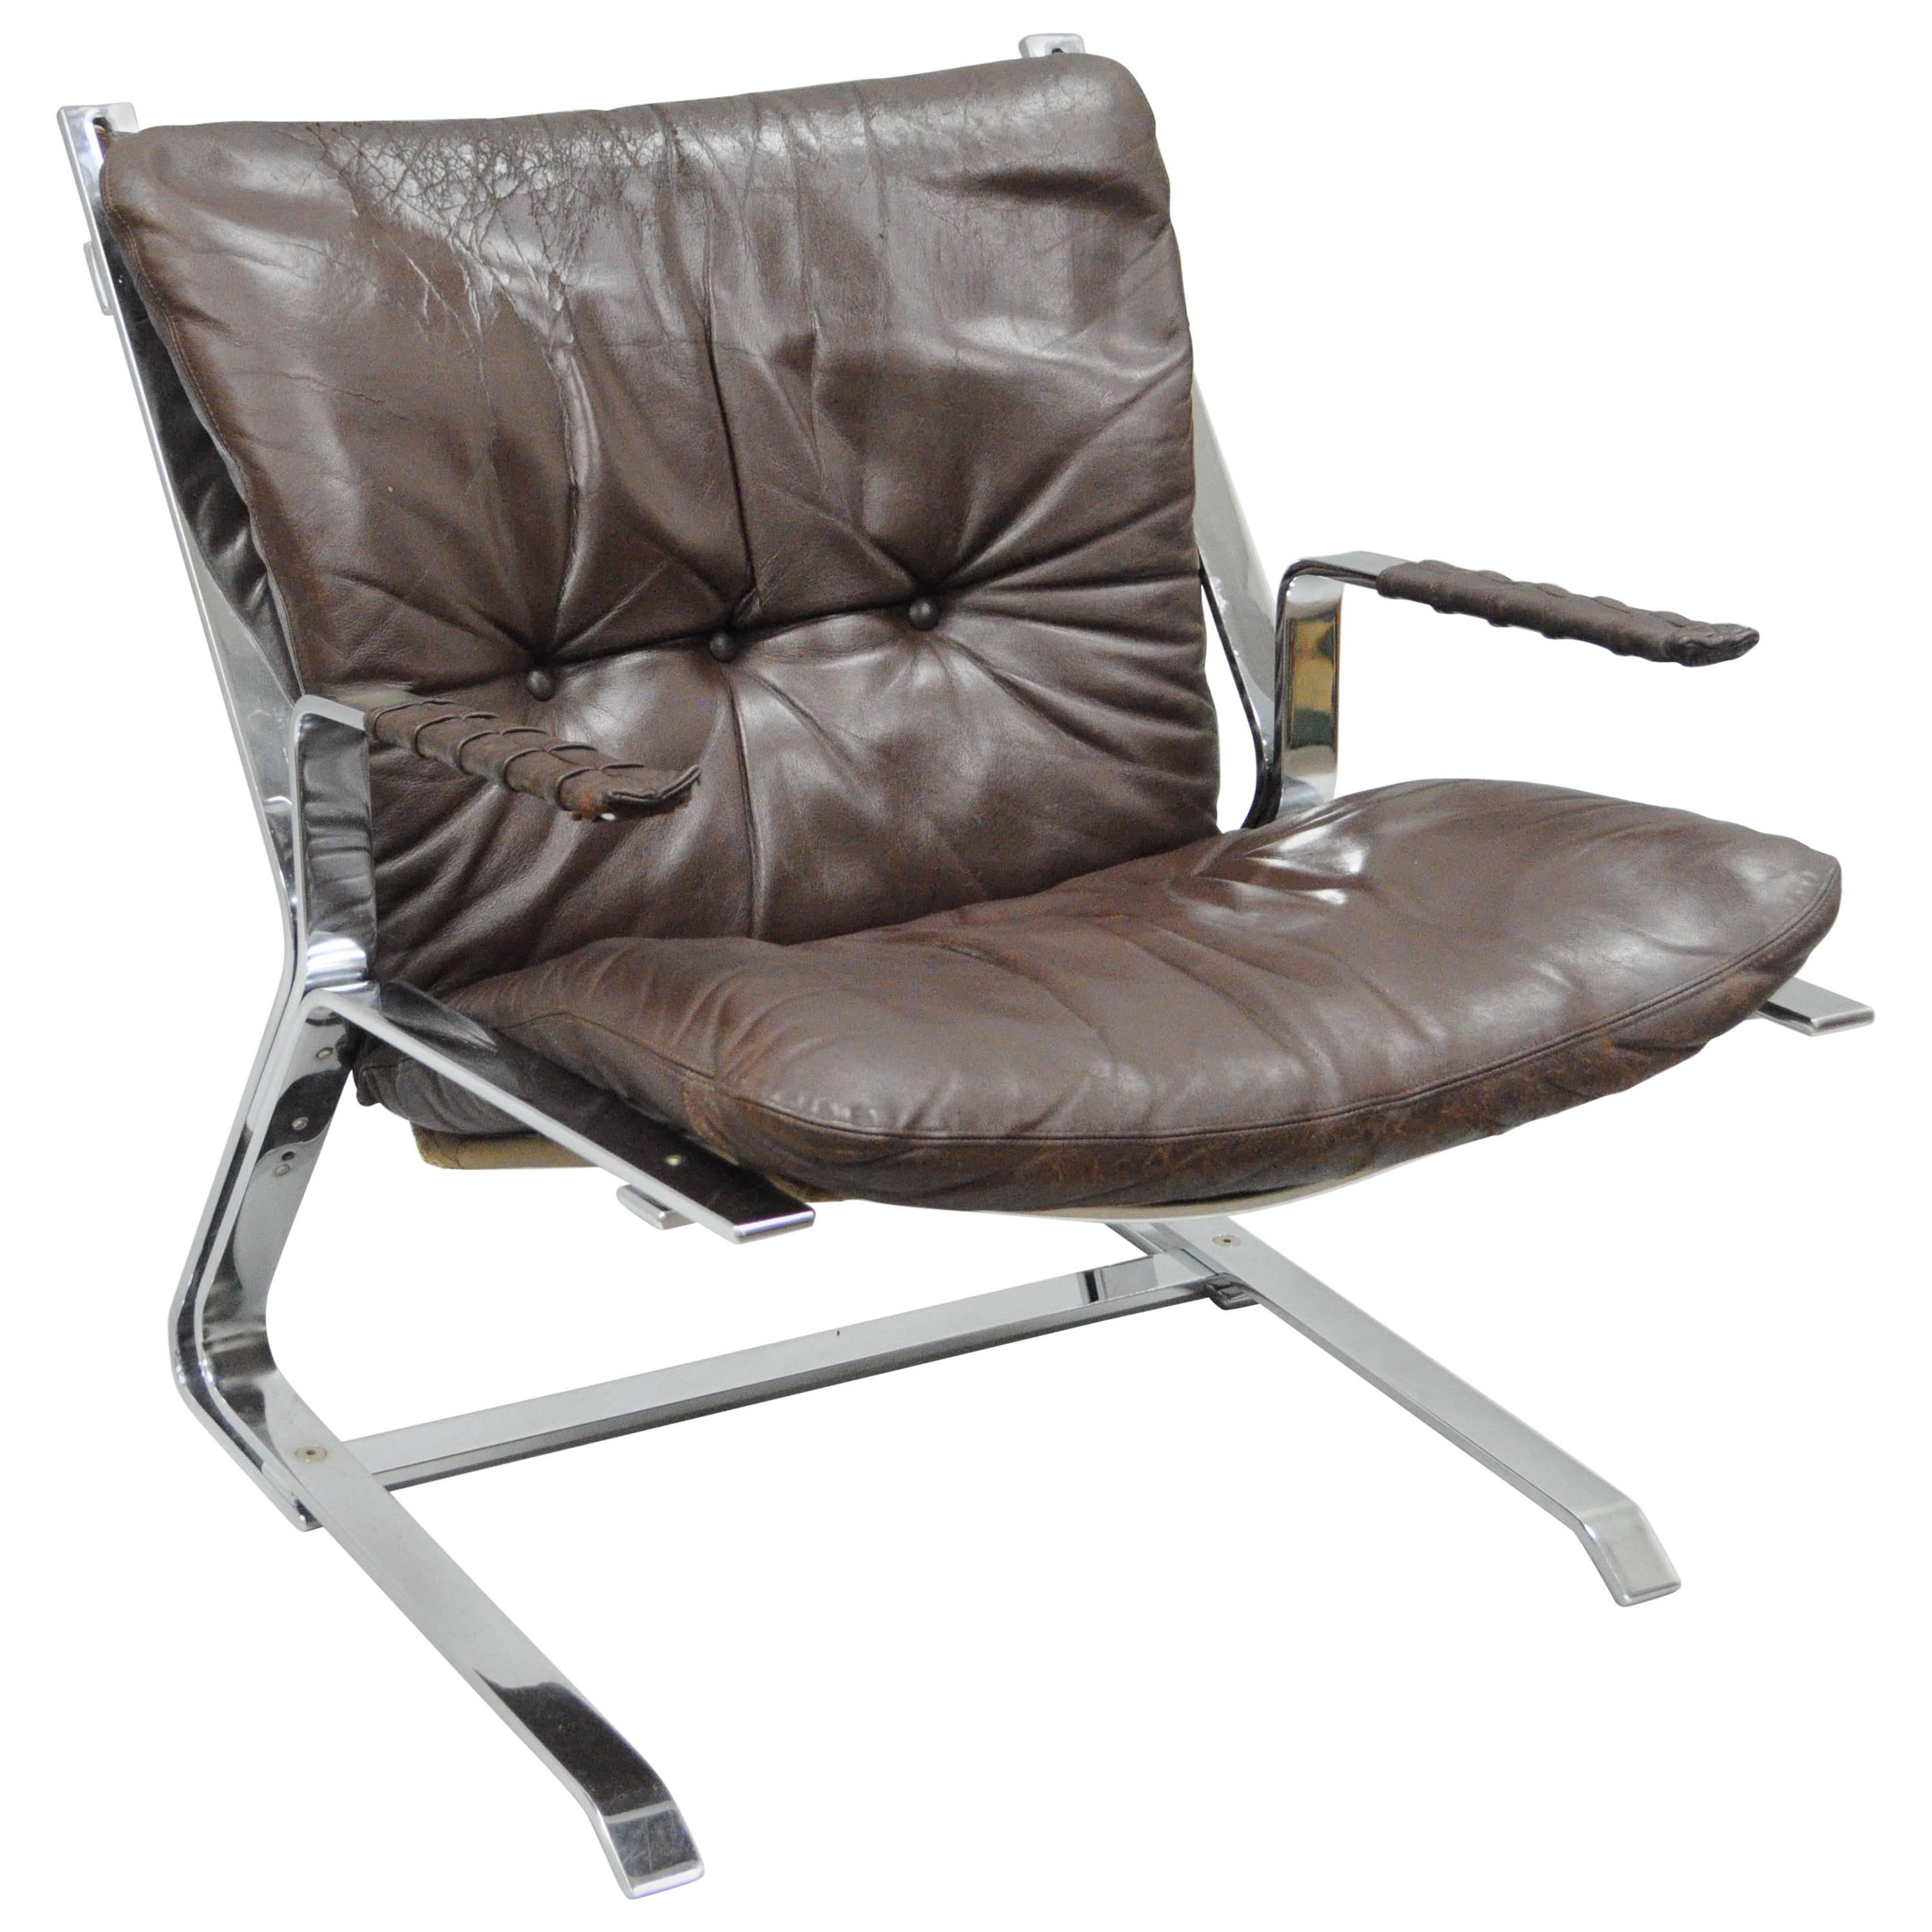 Pirate Lounge Chair Brown Leather & Chrome by Elsa & Nordahl Solheim for Rykkin